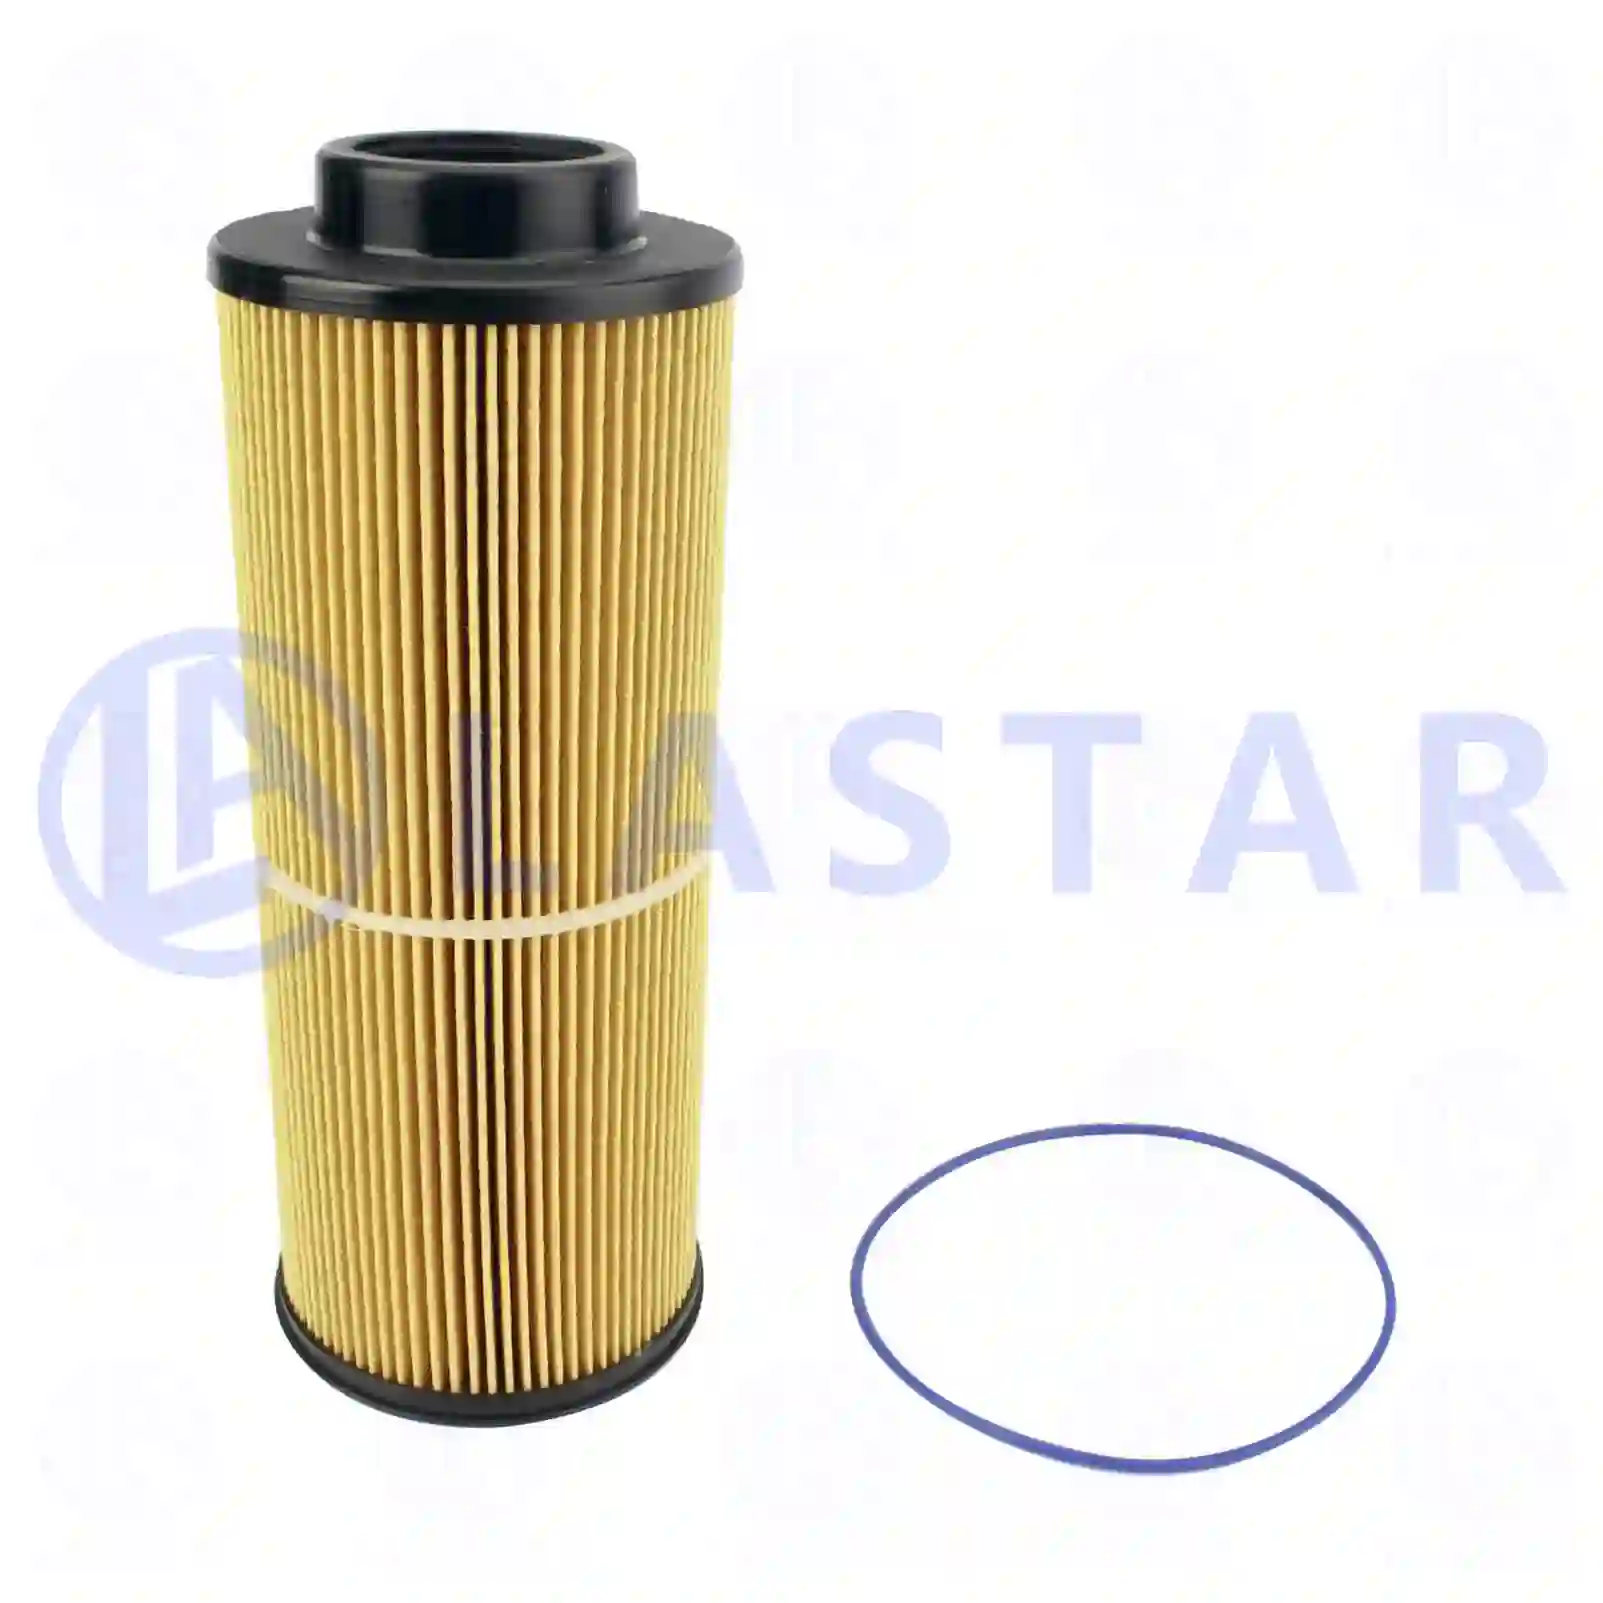 Filter insert, oil cleaner, 77703551, #YOK ||  77703551 Lastar Spare Part | Truck Spare Parts, Auotomotive Spare Parts Filter insert, oil cleaner, 77703551, #YOK ||  77703551 Lastar Spare Part | Truck Spare Parts, Auotomotive Spare Parts